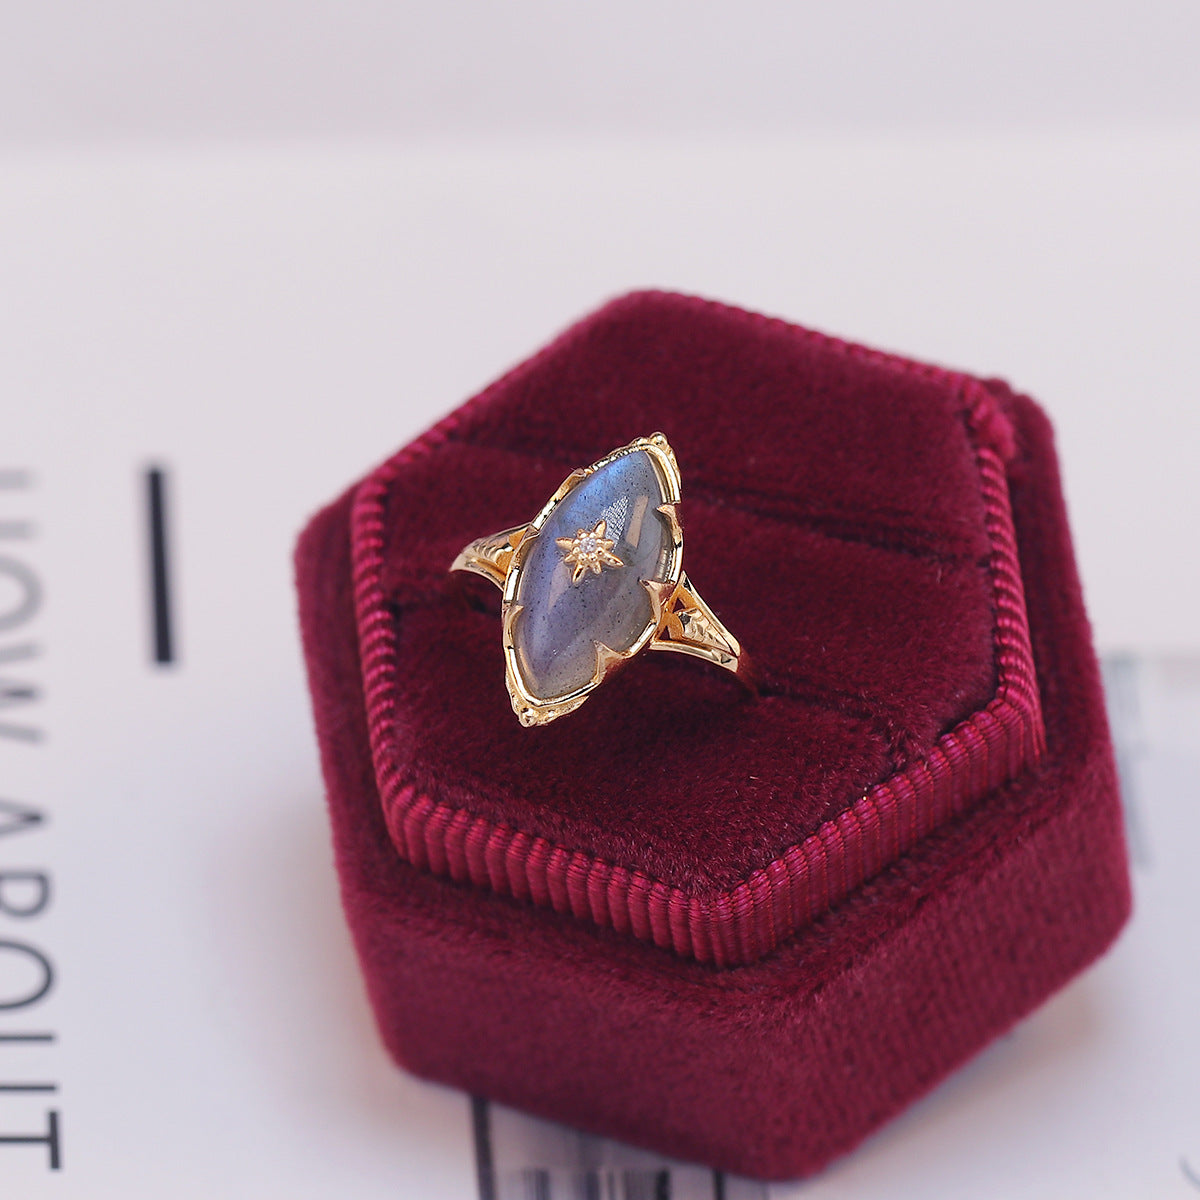 a gold ring with a blue stone in it